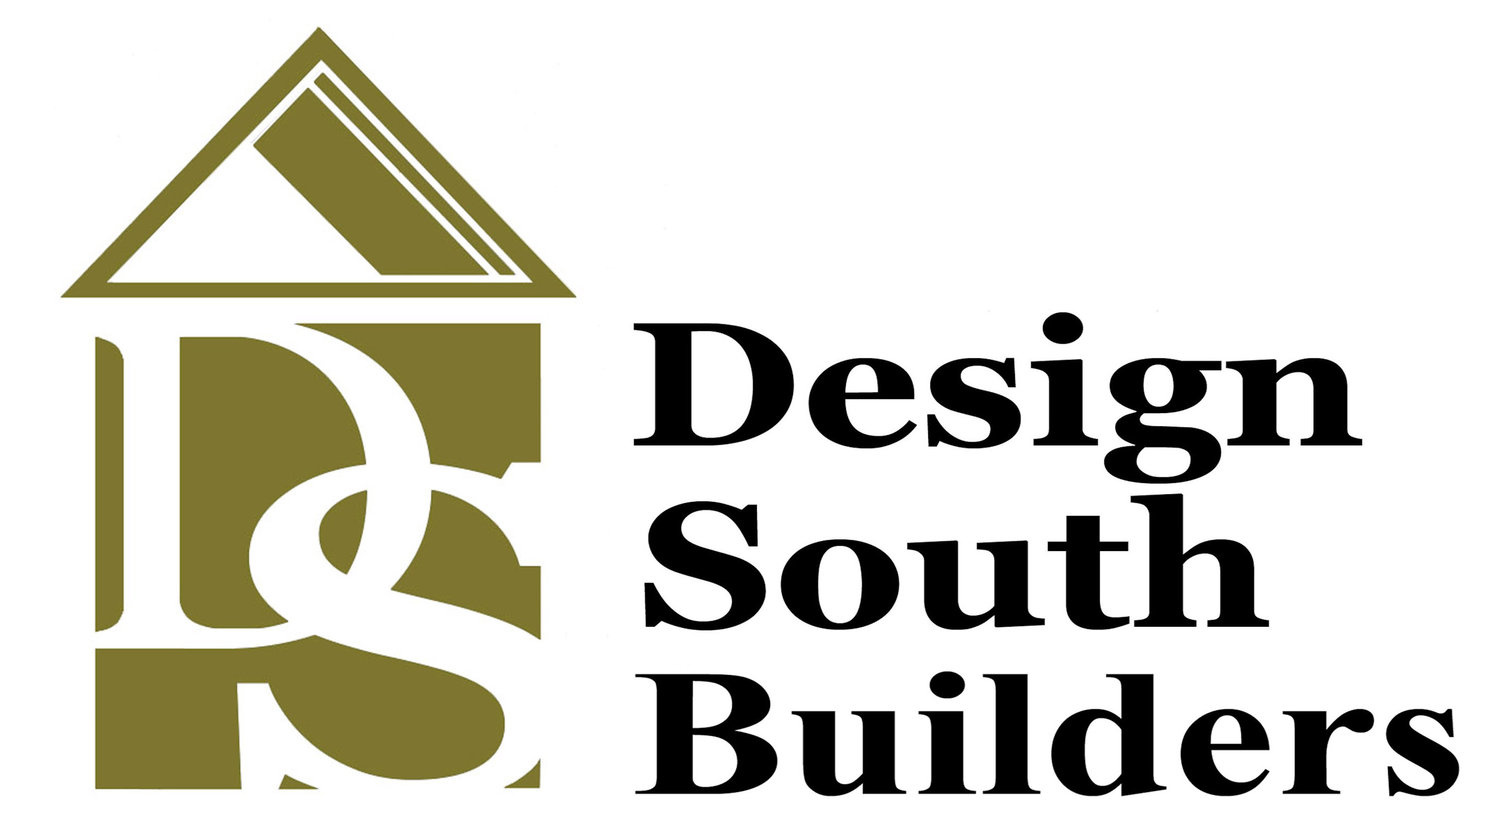 About US Design South Builders